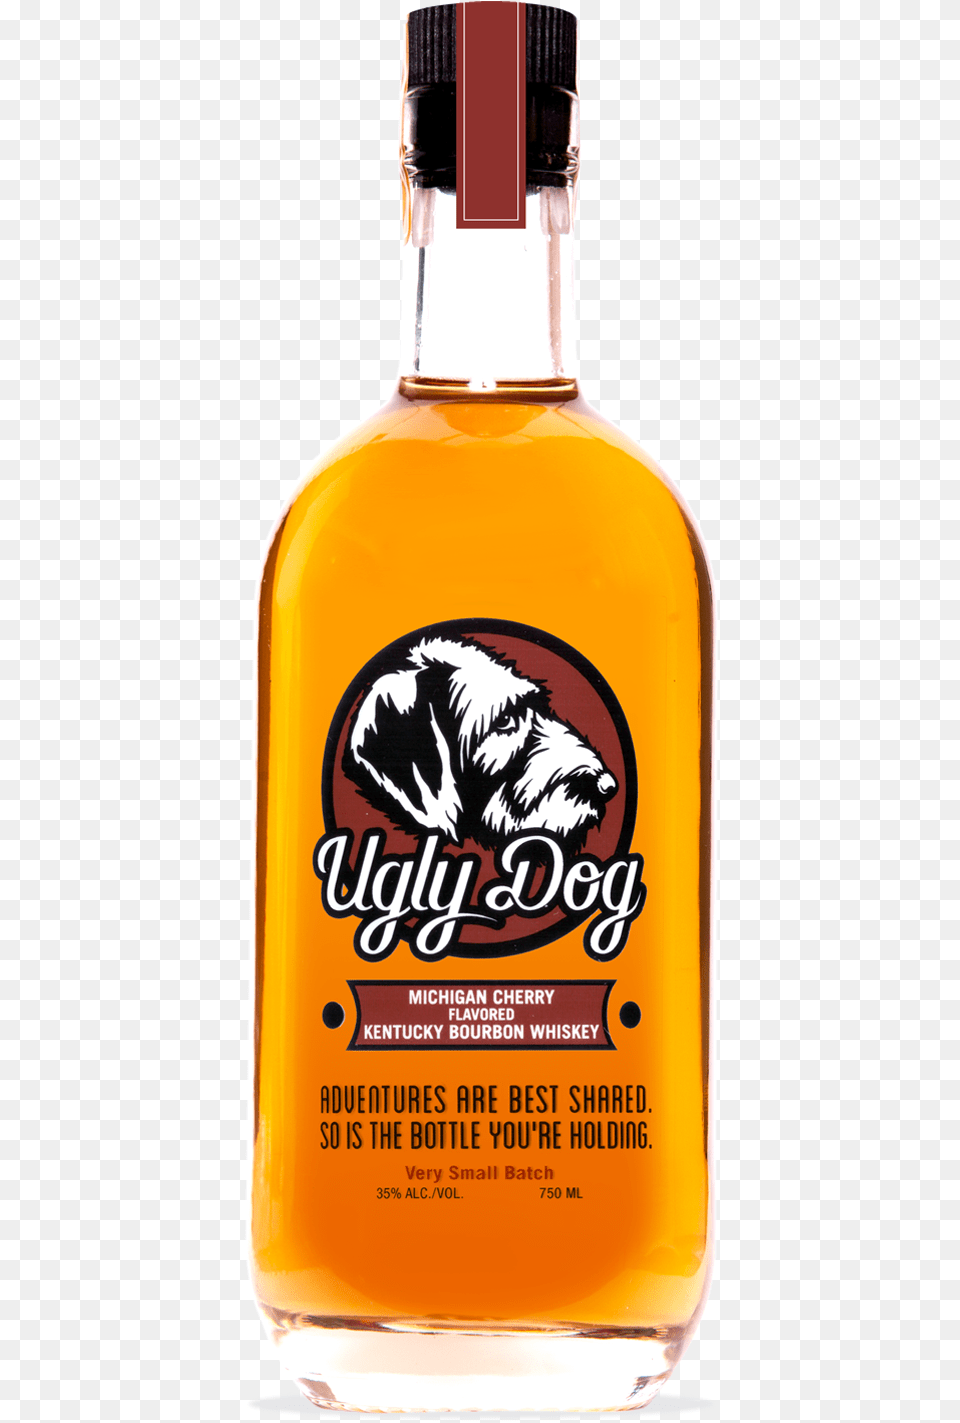 Michigan Cherry Puppy, Alcohol, Beverage, Liquor, Whisky Png Image